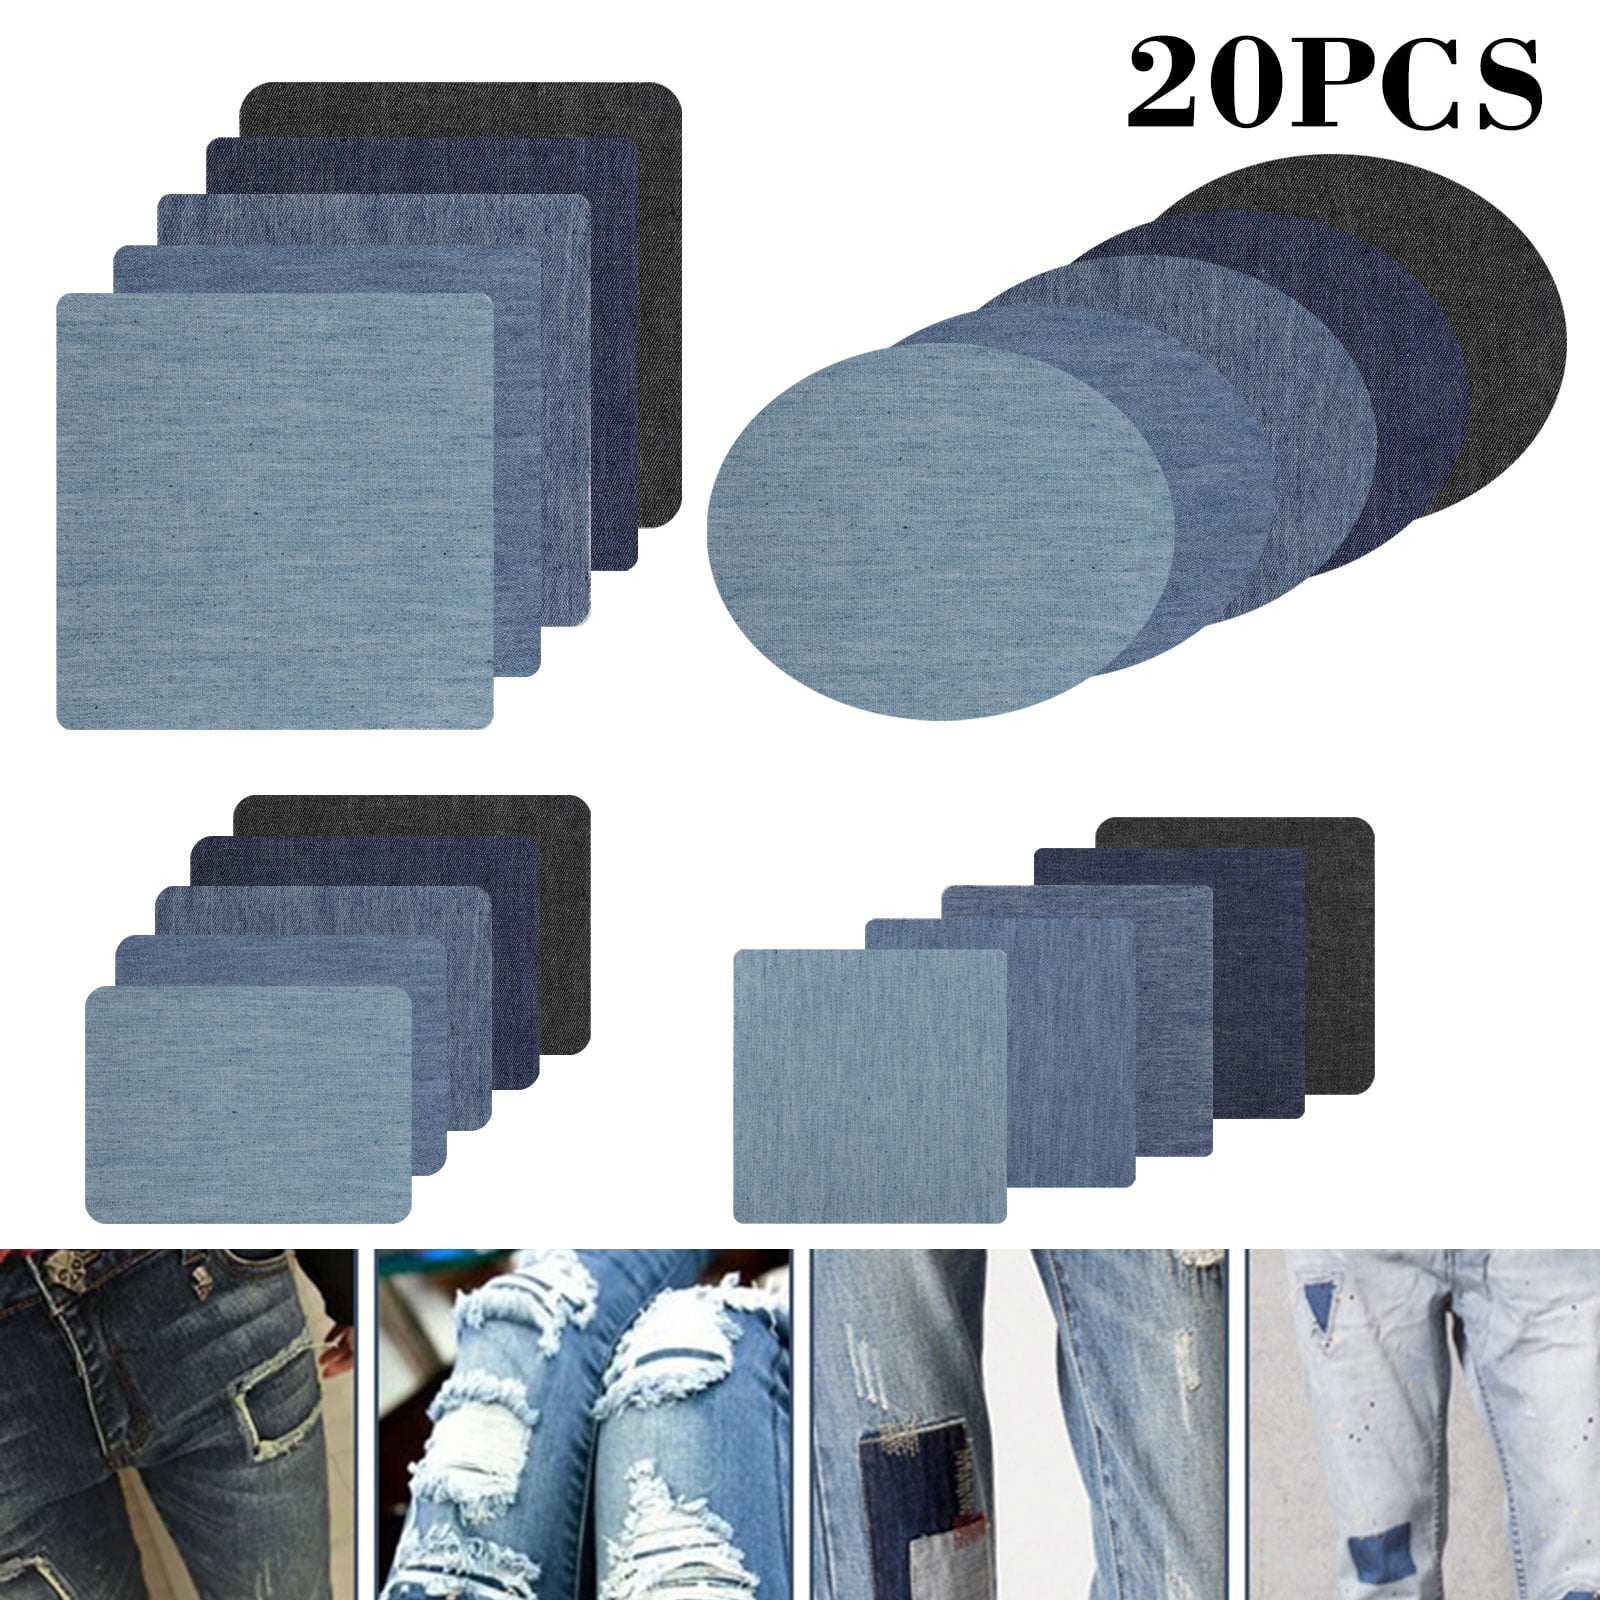 20pcs Iron on Patches for Jeans, TSV Denim Jean Patches with 4 Shades for  Clothing Repair, Adhesive Sewing Patches